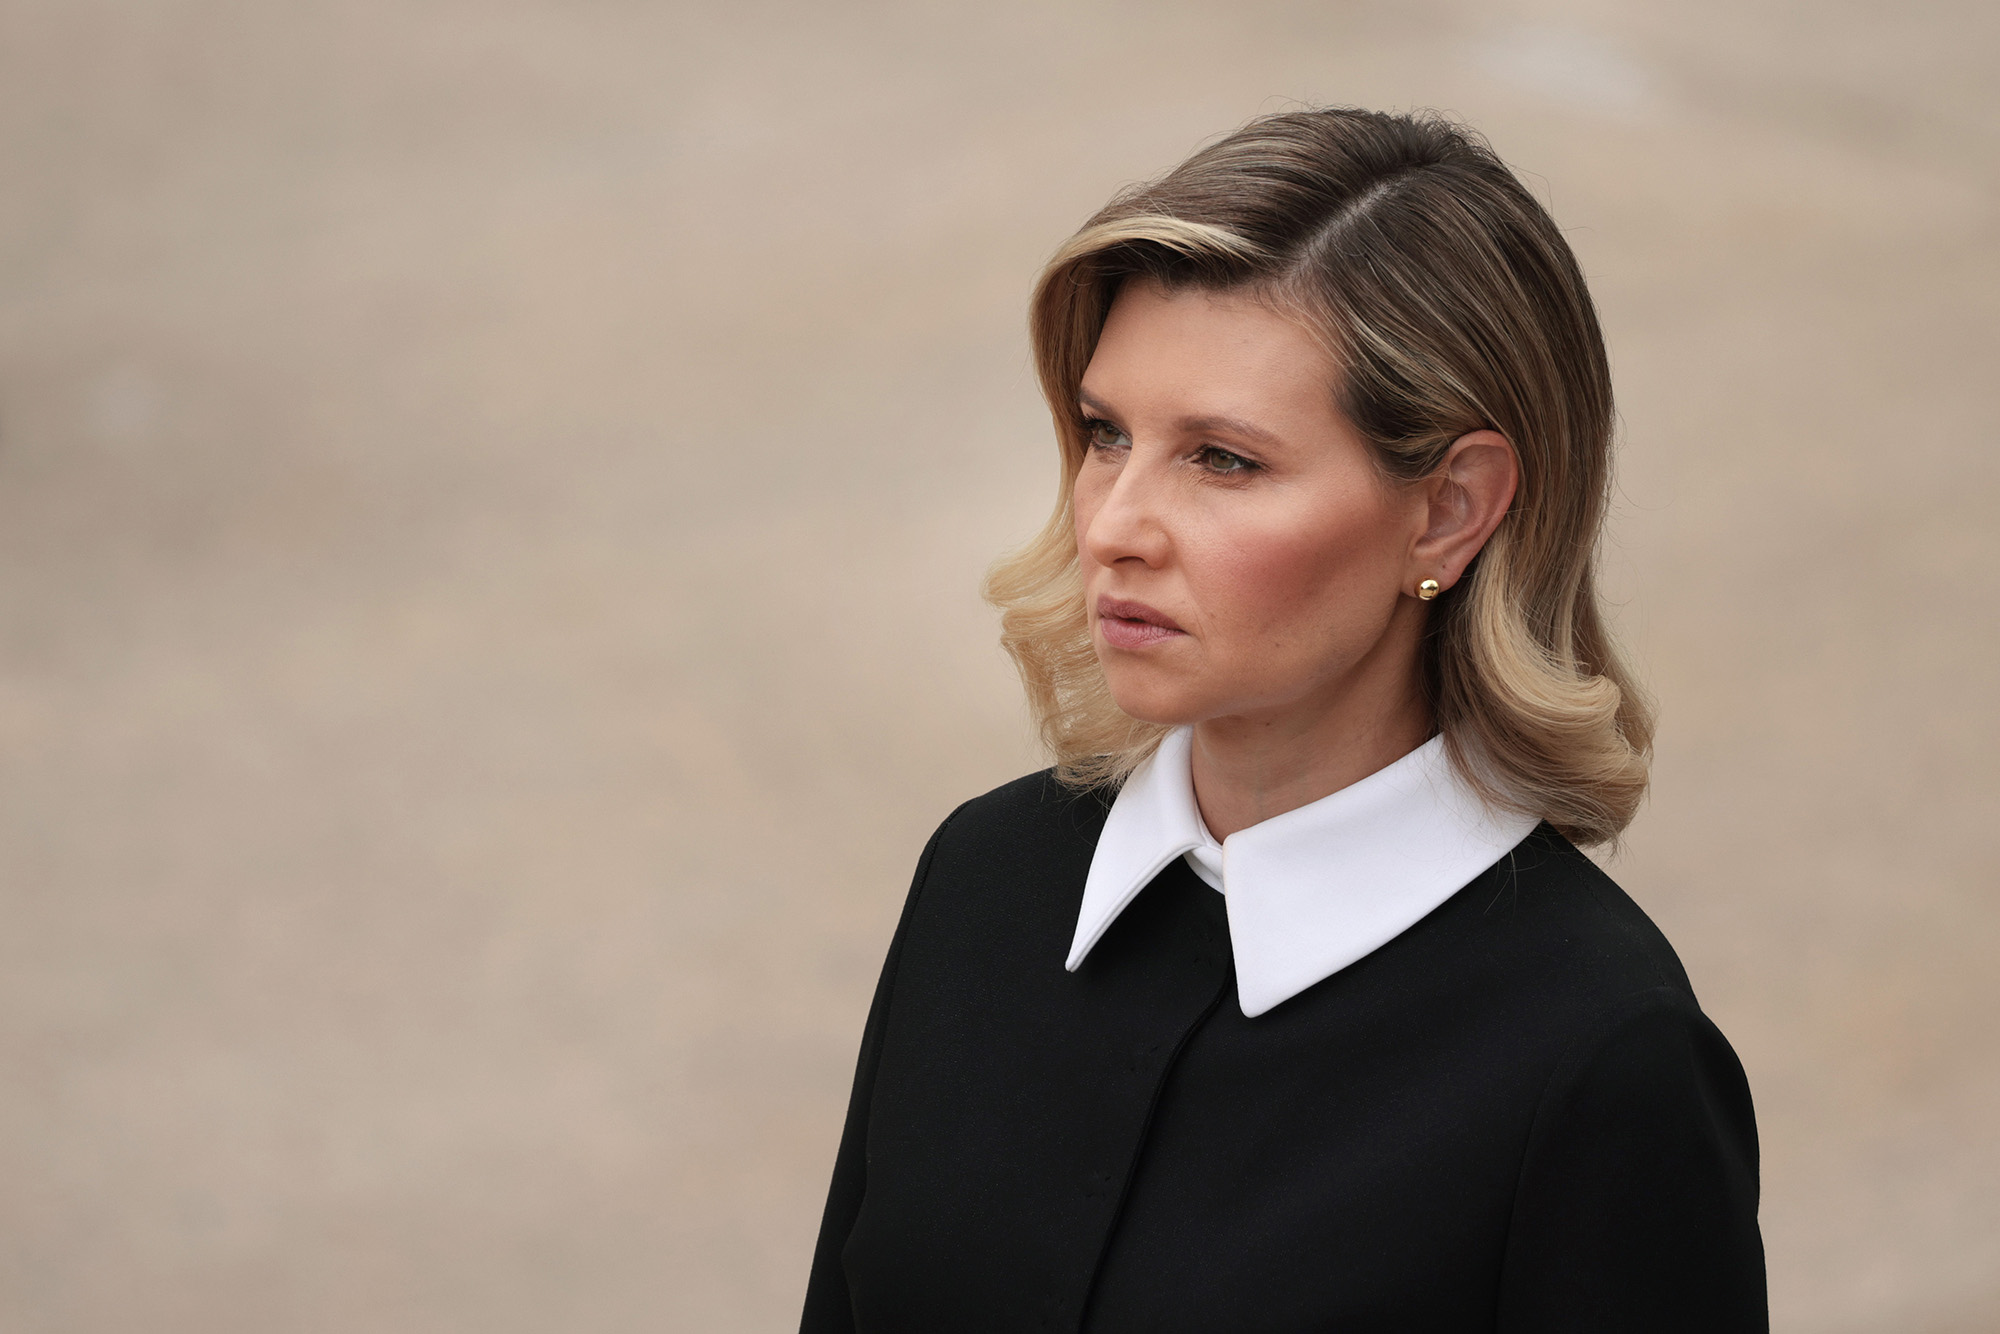 Ukraine's first lady, Olena Zelenska is seen during a wreath laying ceremony at the Tomb of the Unknown Soldier at Arlington National Cemetery in Arlington, Virginia on September 1, 2021.